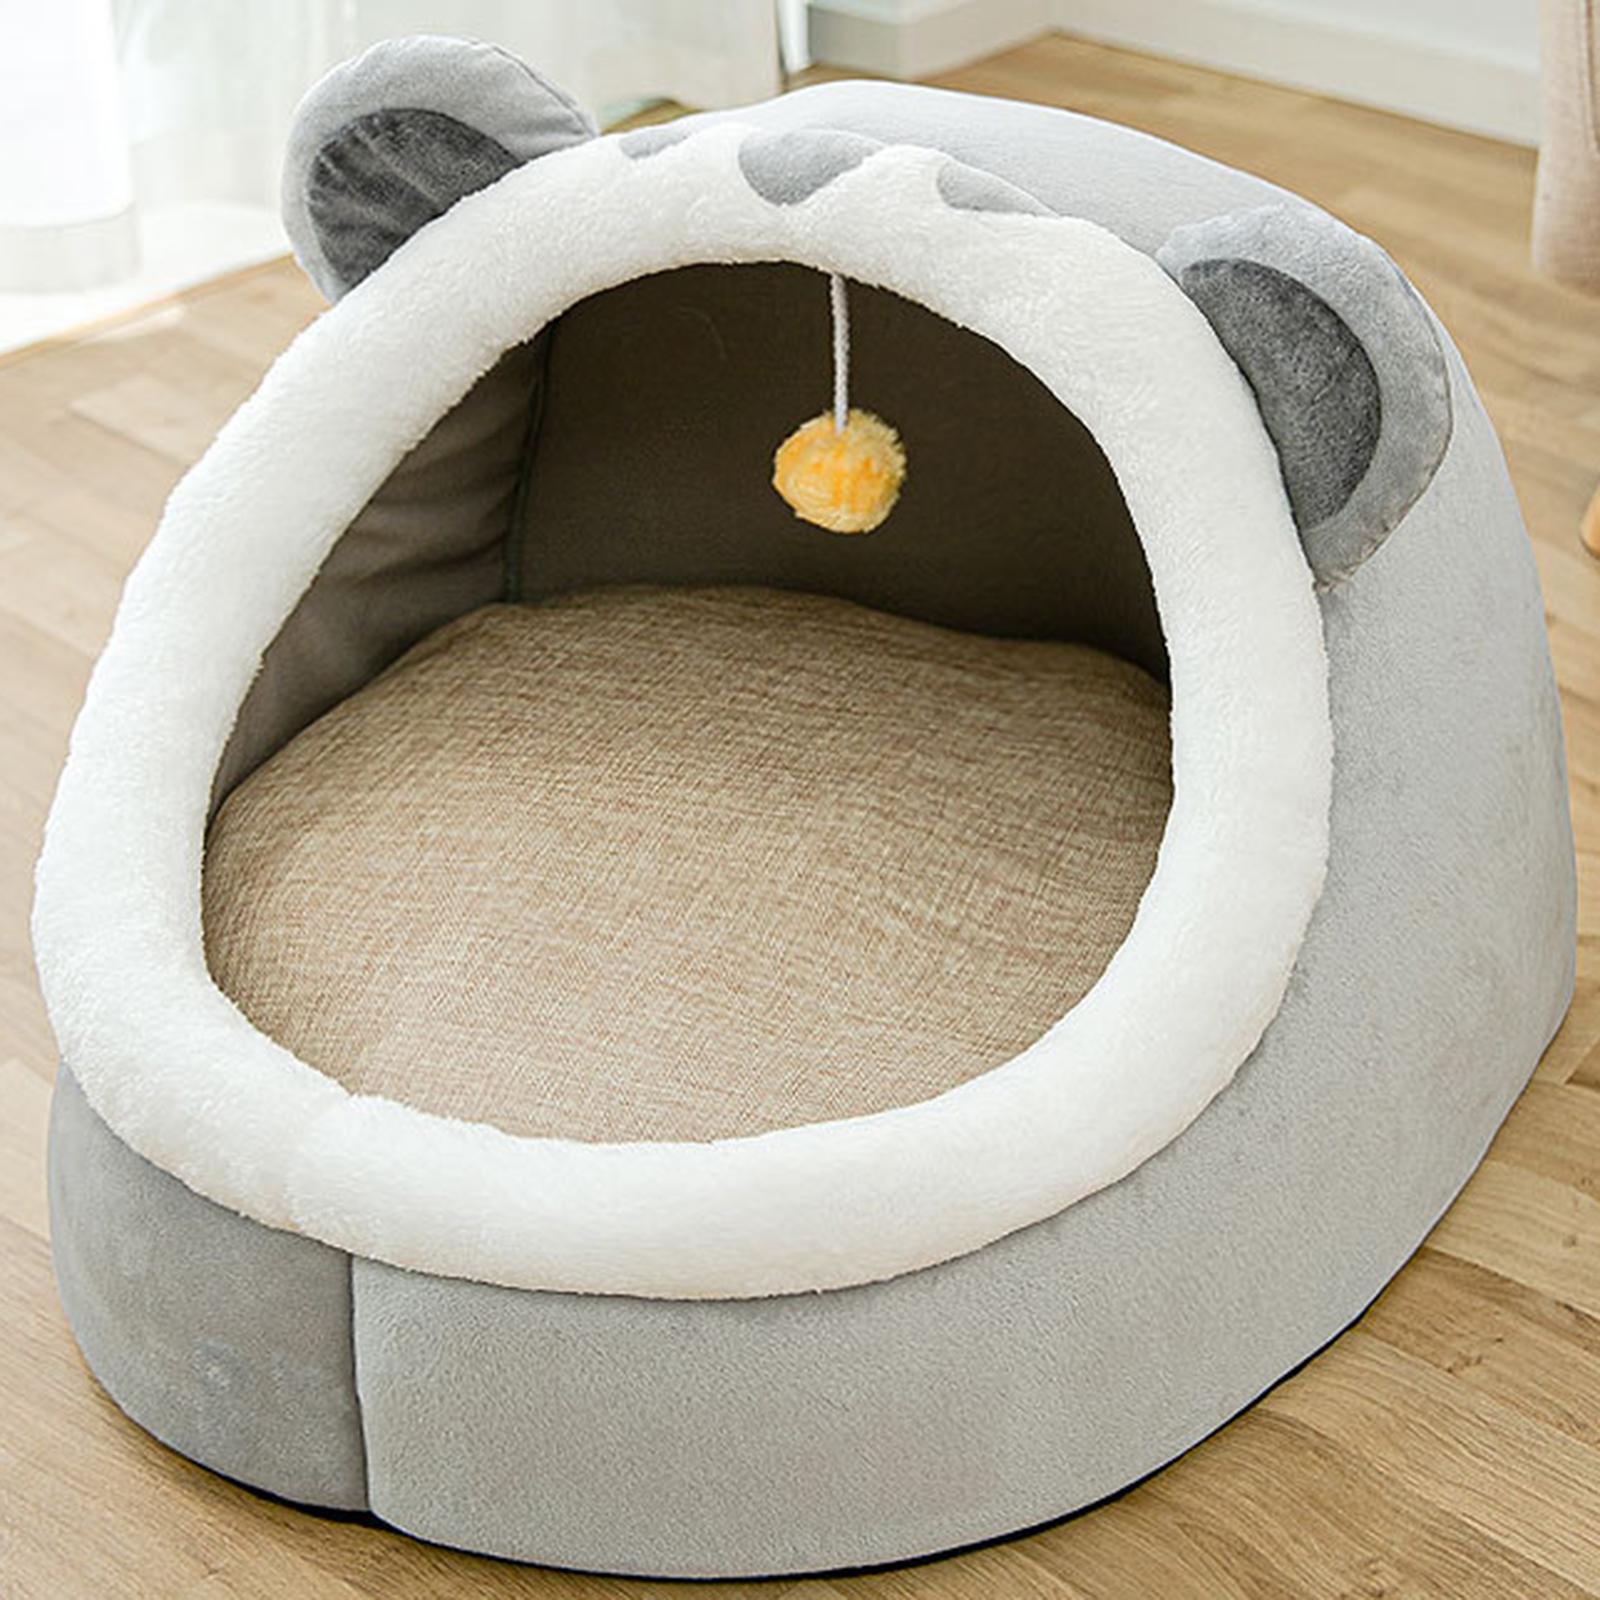 Cute Pet Bed Cat Dog Nest Bed Kennel Warm Comfortable for Kitten Sleeping Gray L